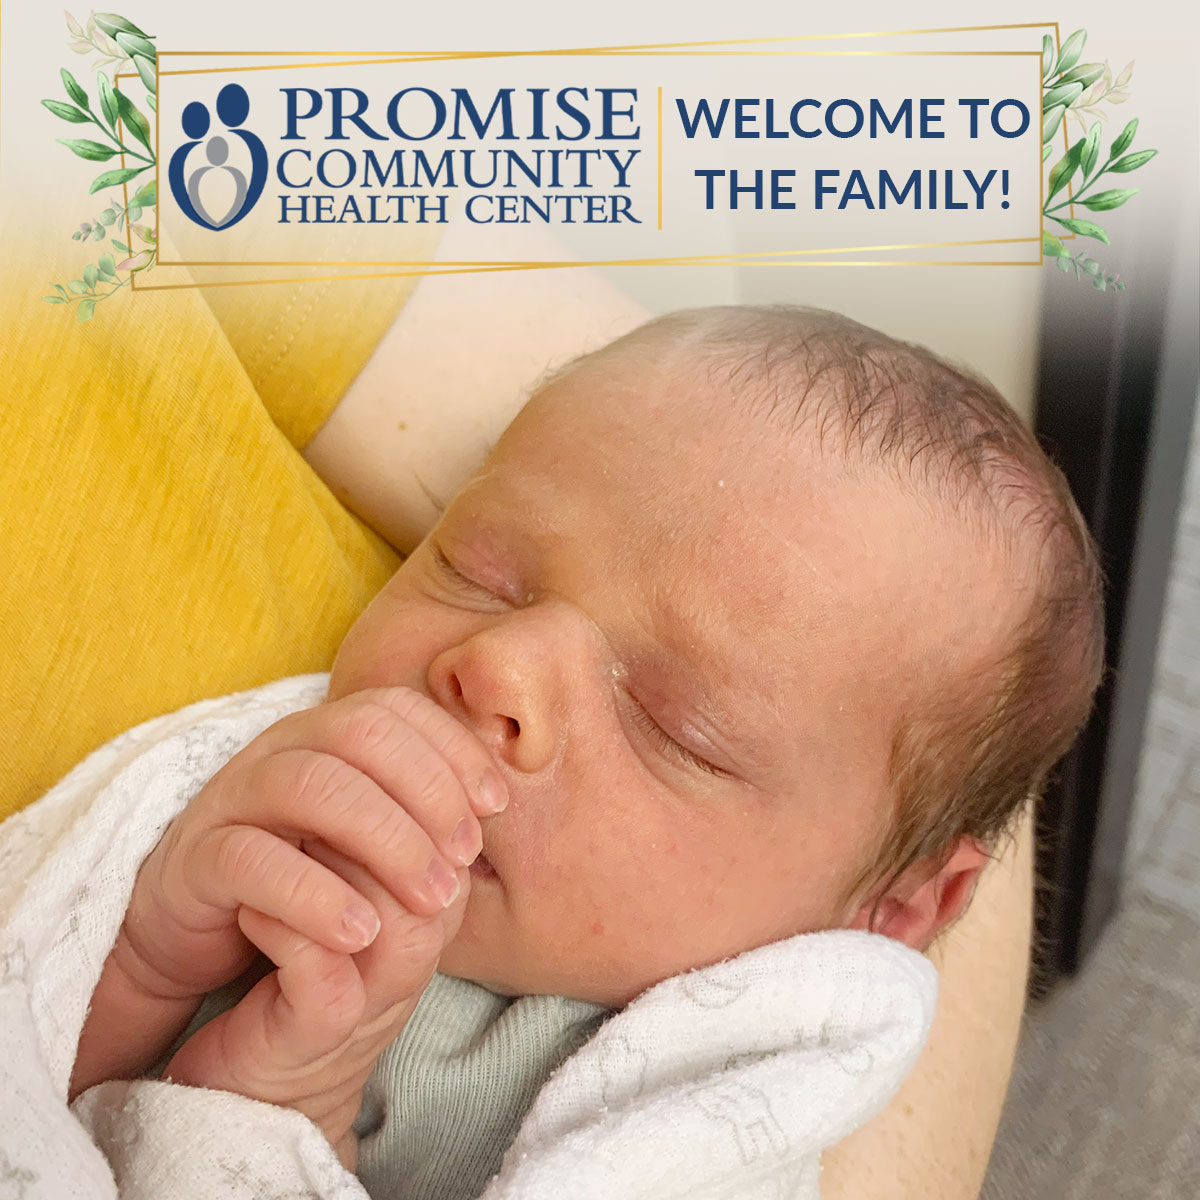 Home birth in Orange City, Iowa | Promise Community Health Center in Sioux Center, Iowa | Midwives in northwest Iowa, Midwives in southeast South Dakota, Midwives in southwest Minnesota | Midwives in Sioux Falls South Dakota, Midwives in Beresford South Dakota, Midwives in Sioux City IA, Midwives in LeMars IA, Midwives in Worthington MN, Midwives in Iowa, Midwives in South Dakota, Midwives in Minnesota